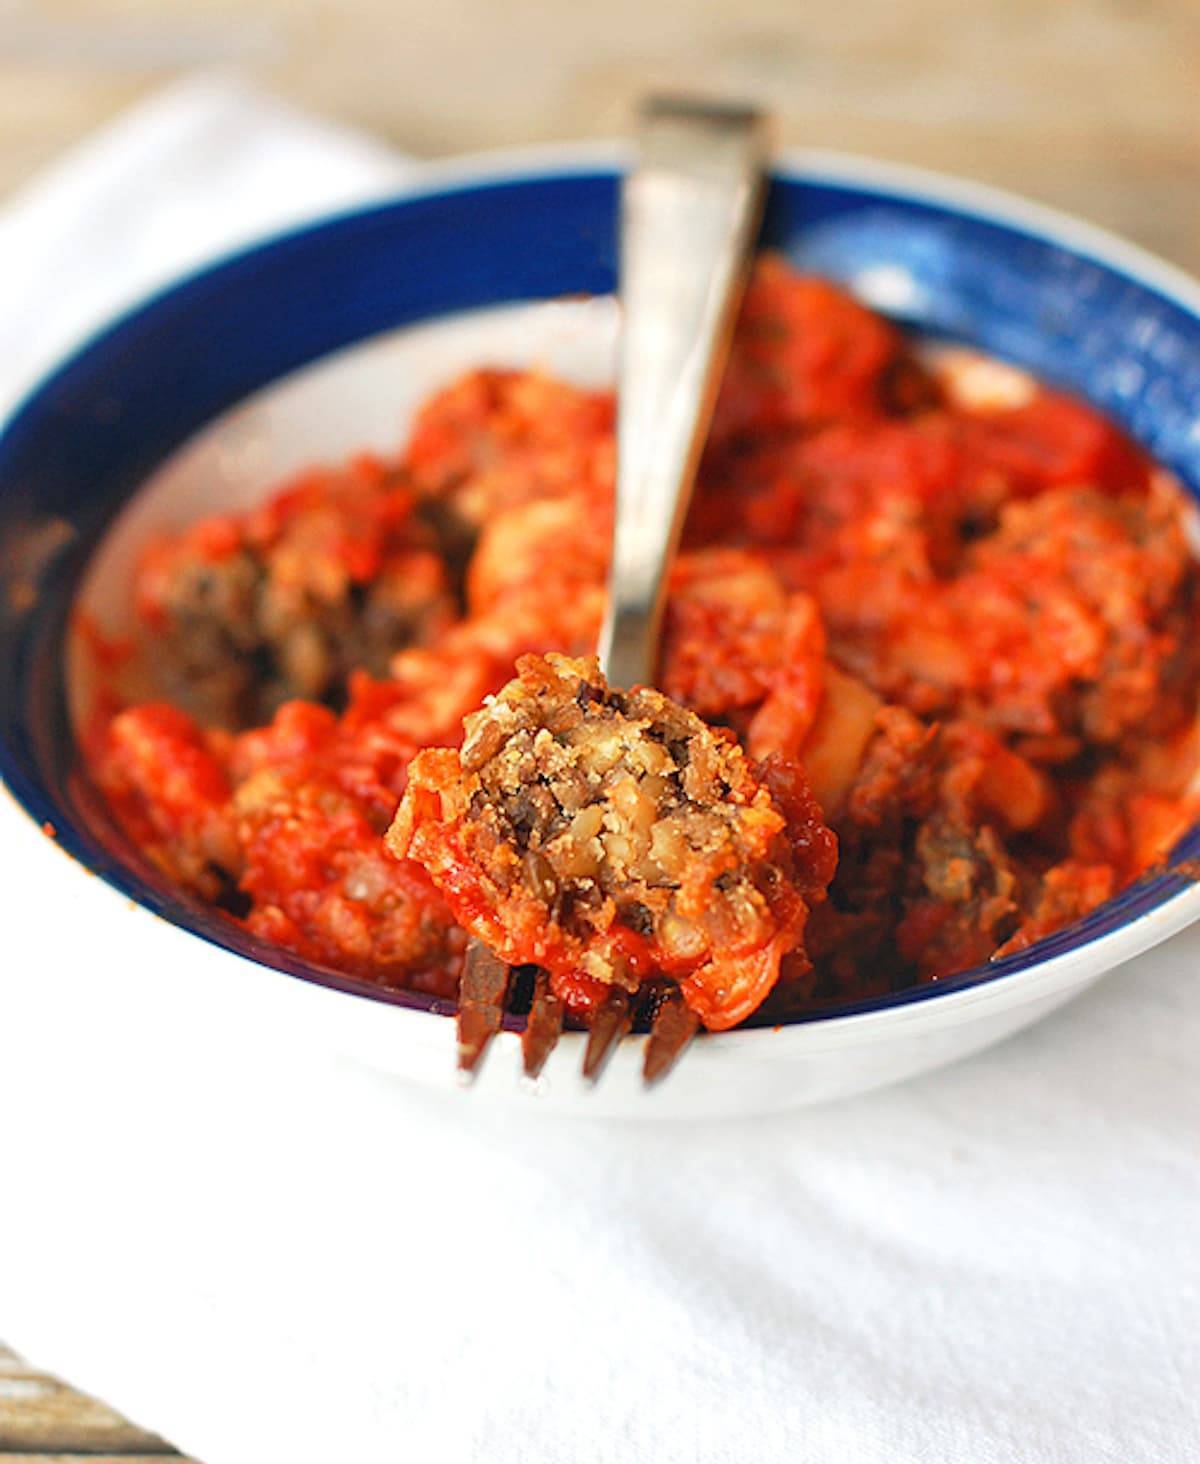 Meatless Meatballs with lentils and wild rice, and topped with marinara sauce and melted cheese on a fork.